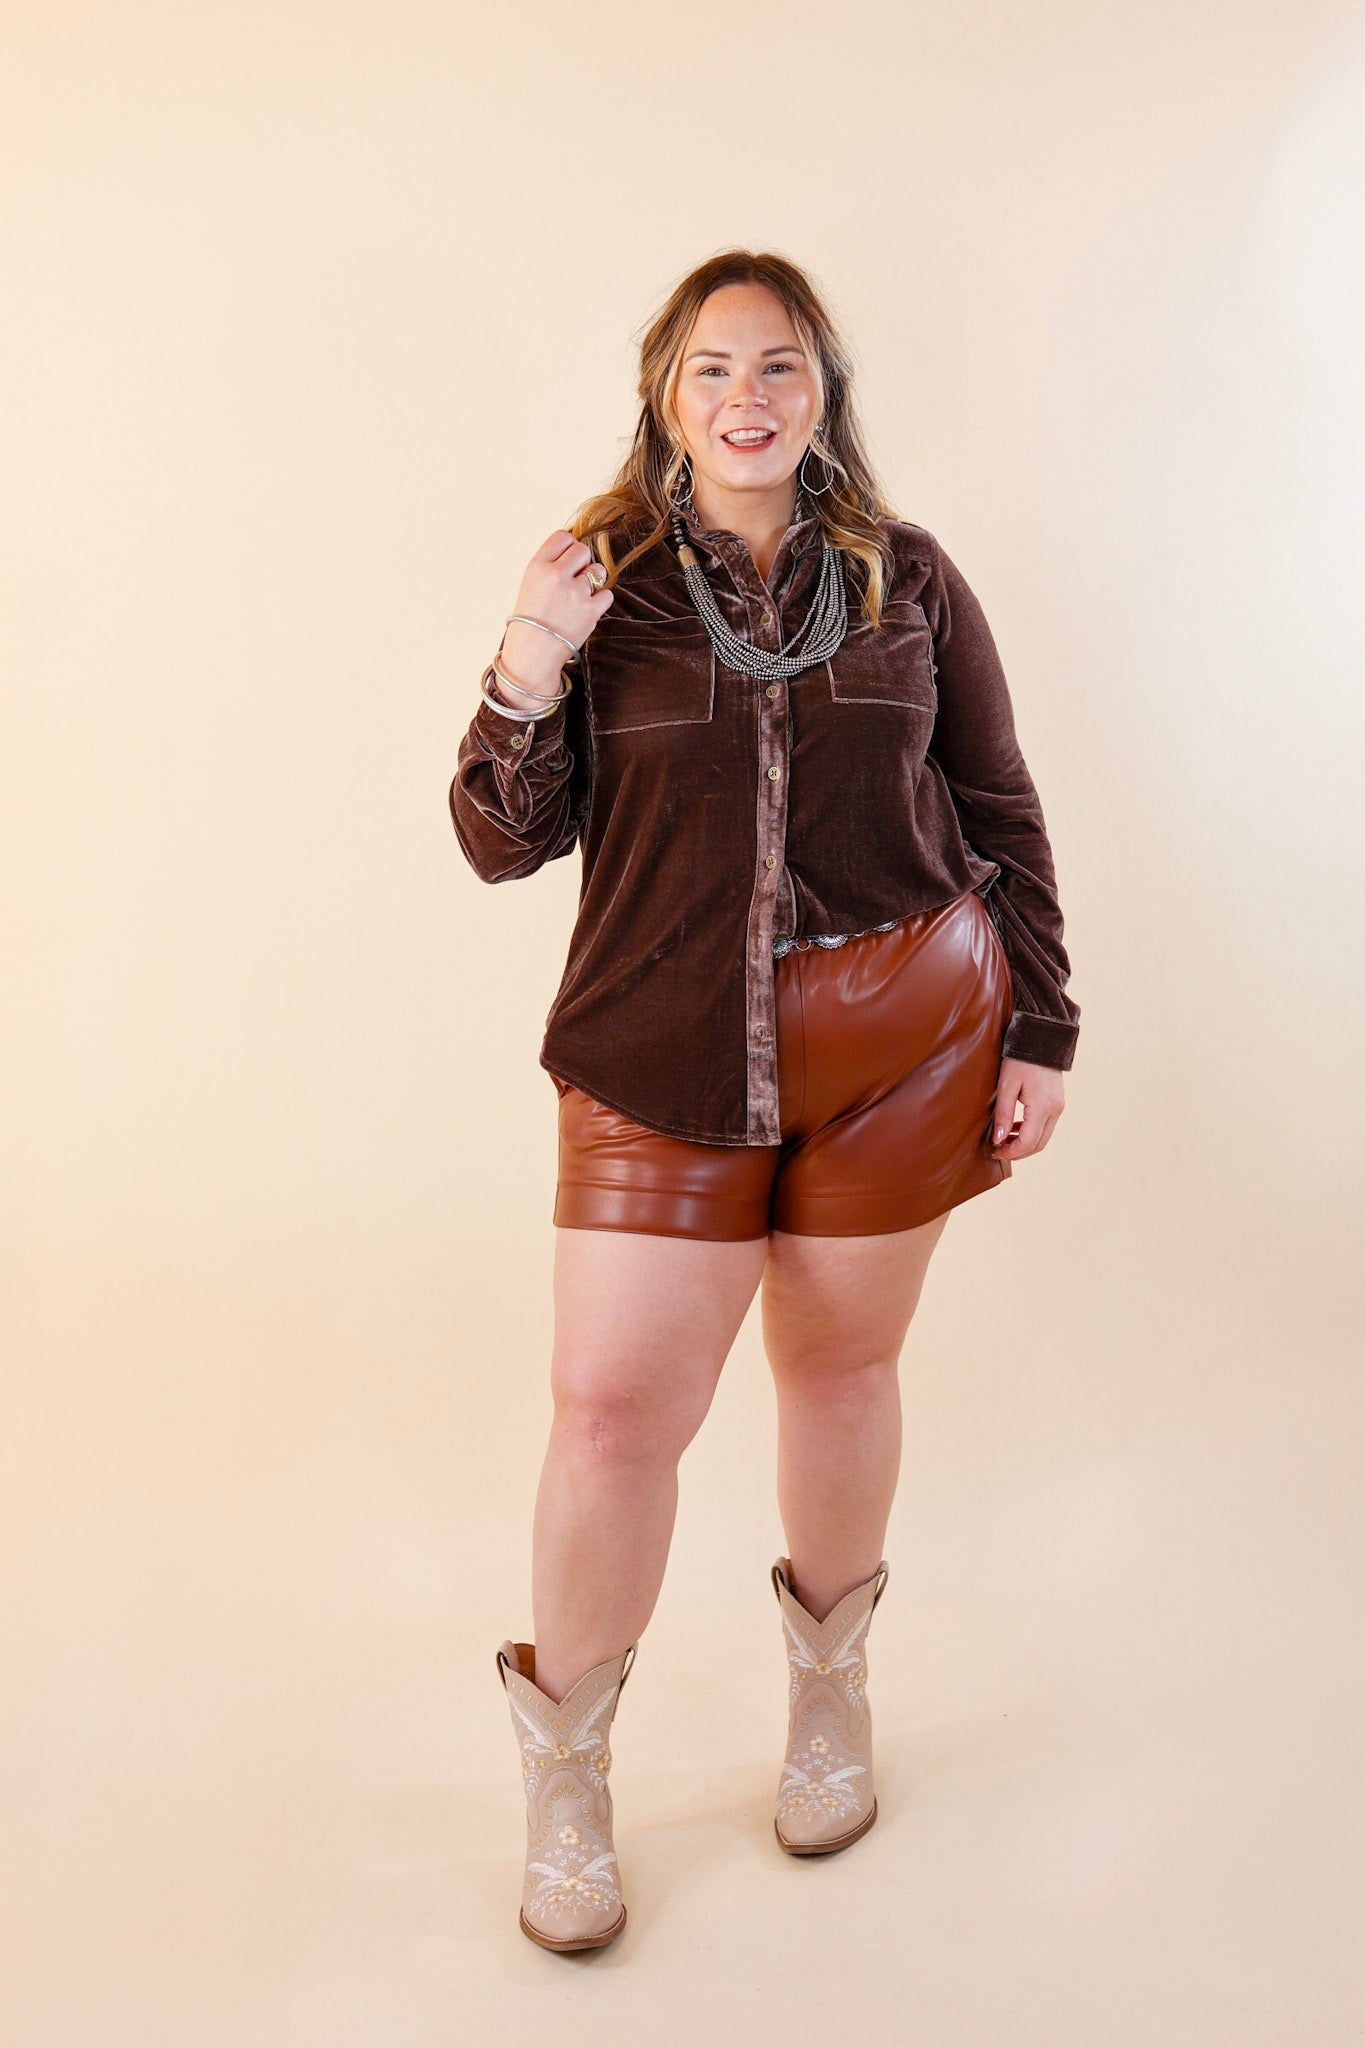 Candy Apple Evening Button Up Velvet Long Sleeve Blouse in Almond Brown - Giddy Up Glamour Boutique